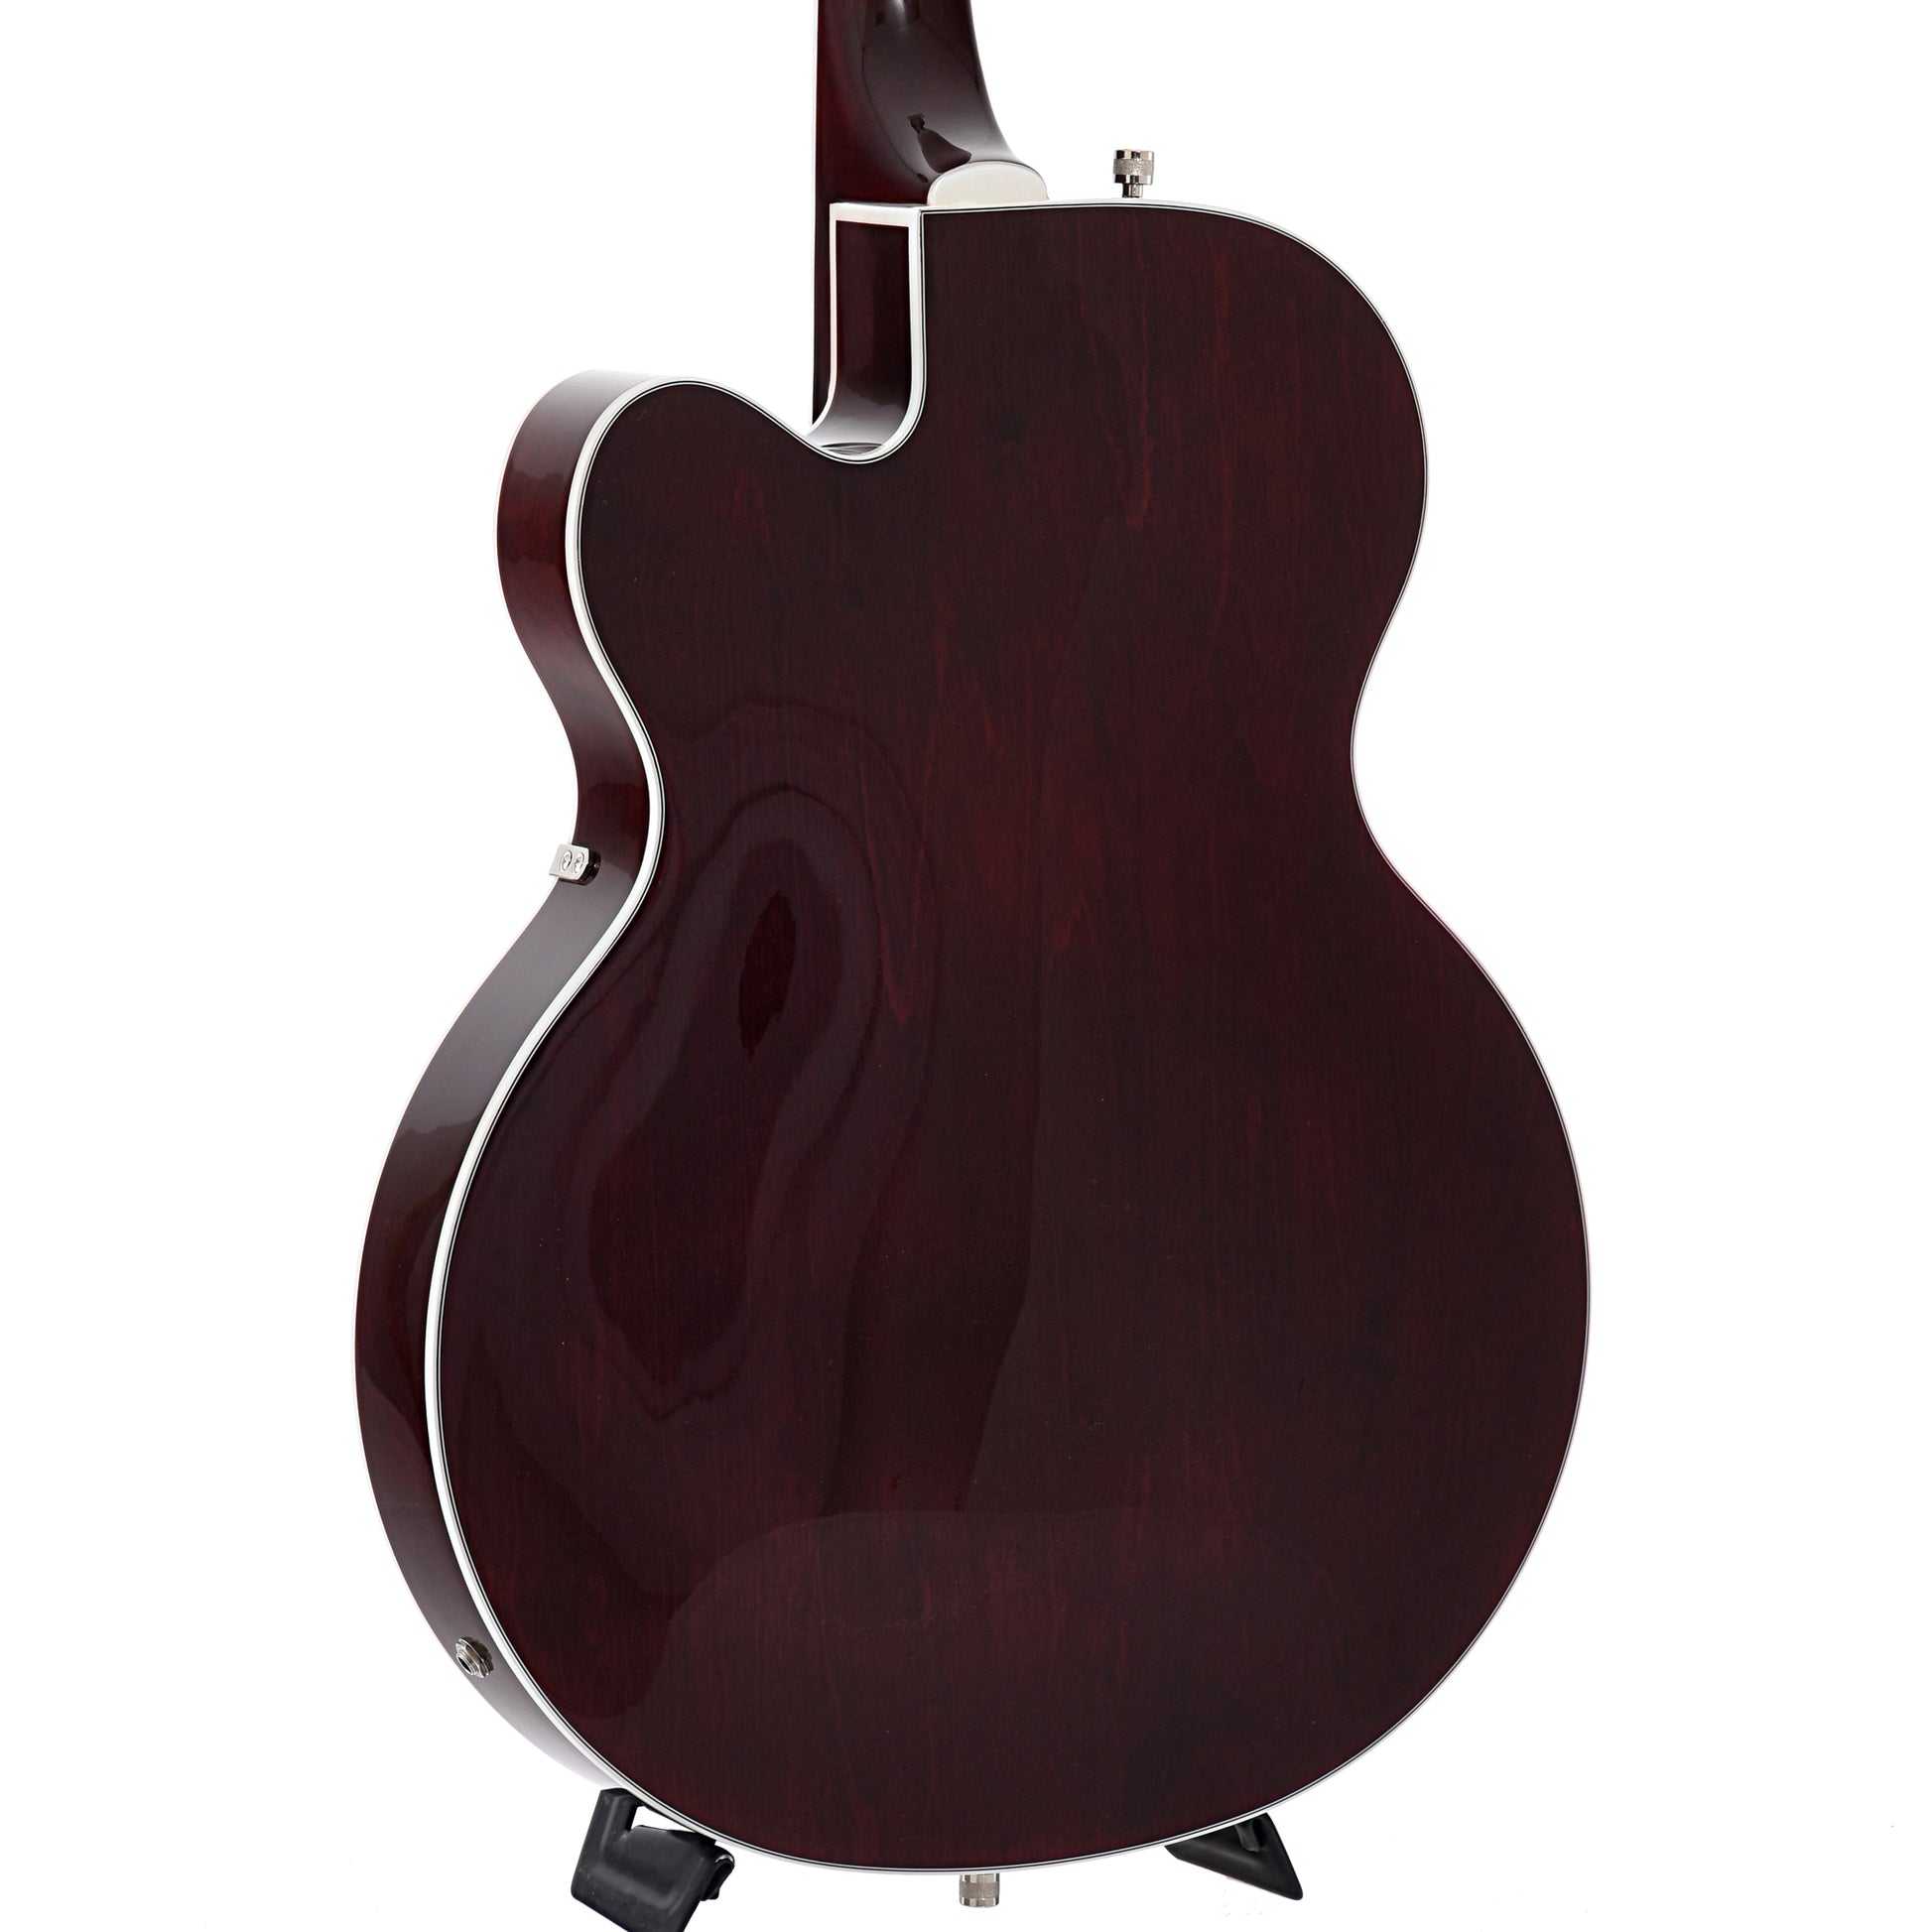 Image 10 of Gretsch G5420T Electromatic Classic Hollow Body Single Cut with Bigbsy, Walnut Stain- SKU# G5420T-WLNT : Product Type Hollow Body Electric Guitars : Elderly Instruments